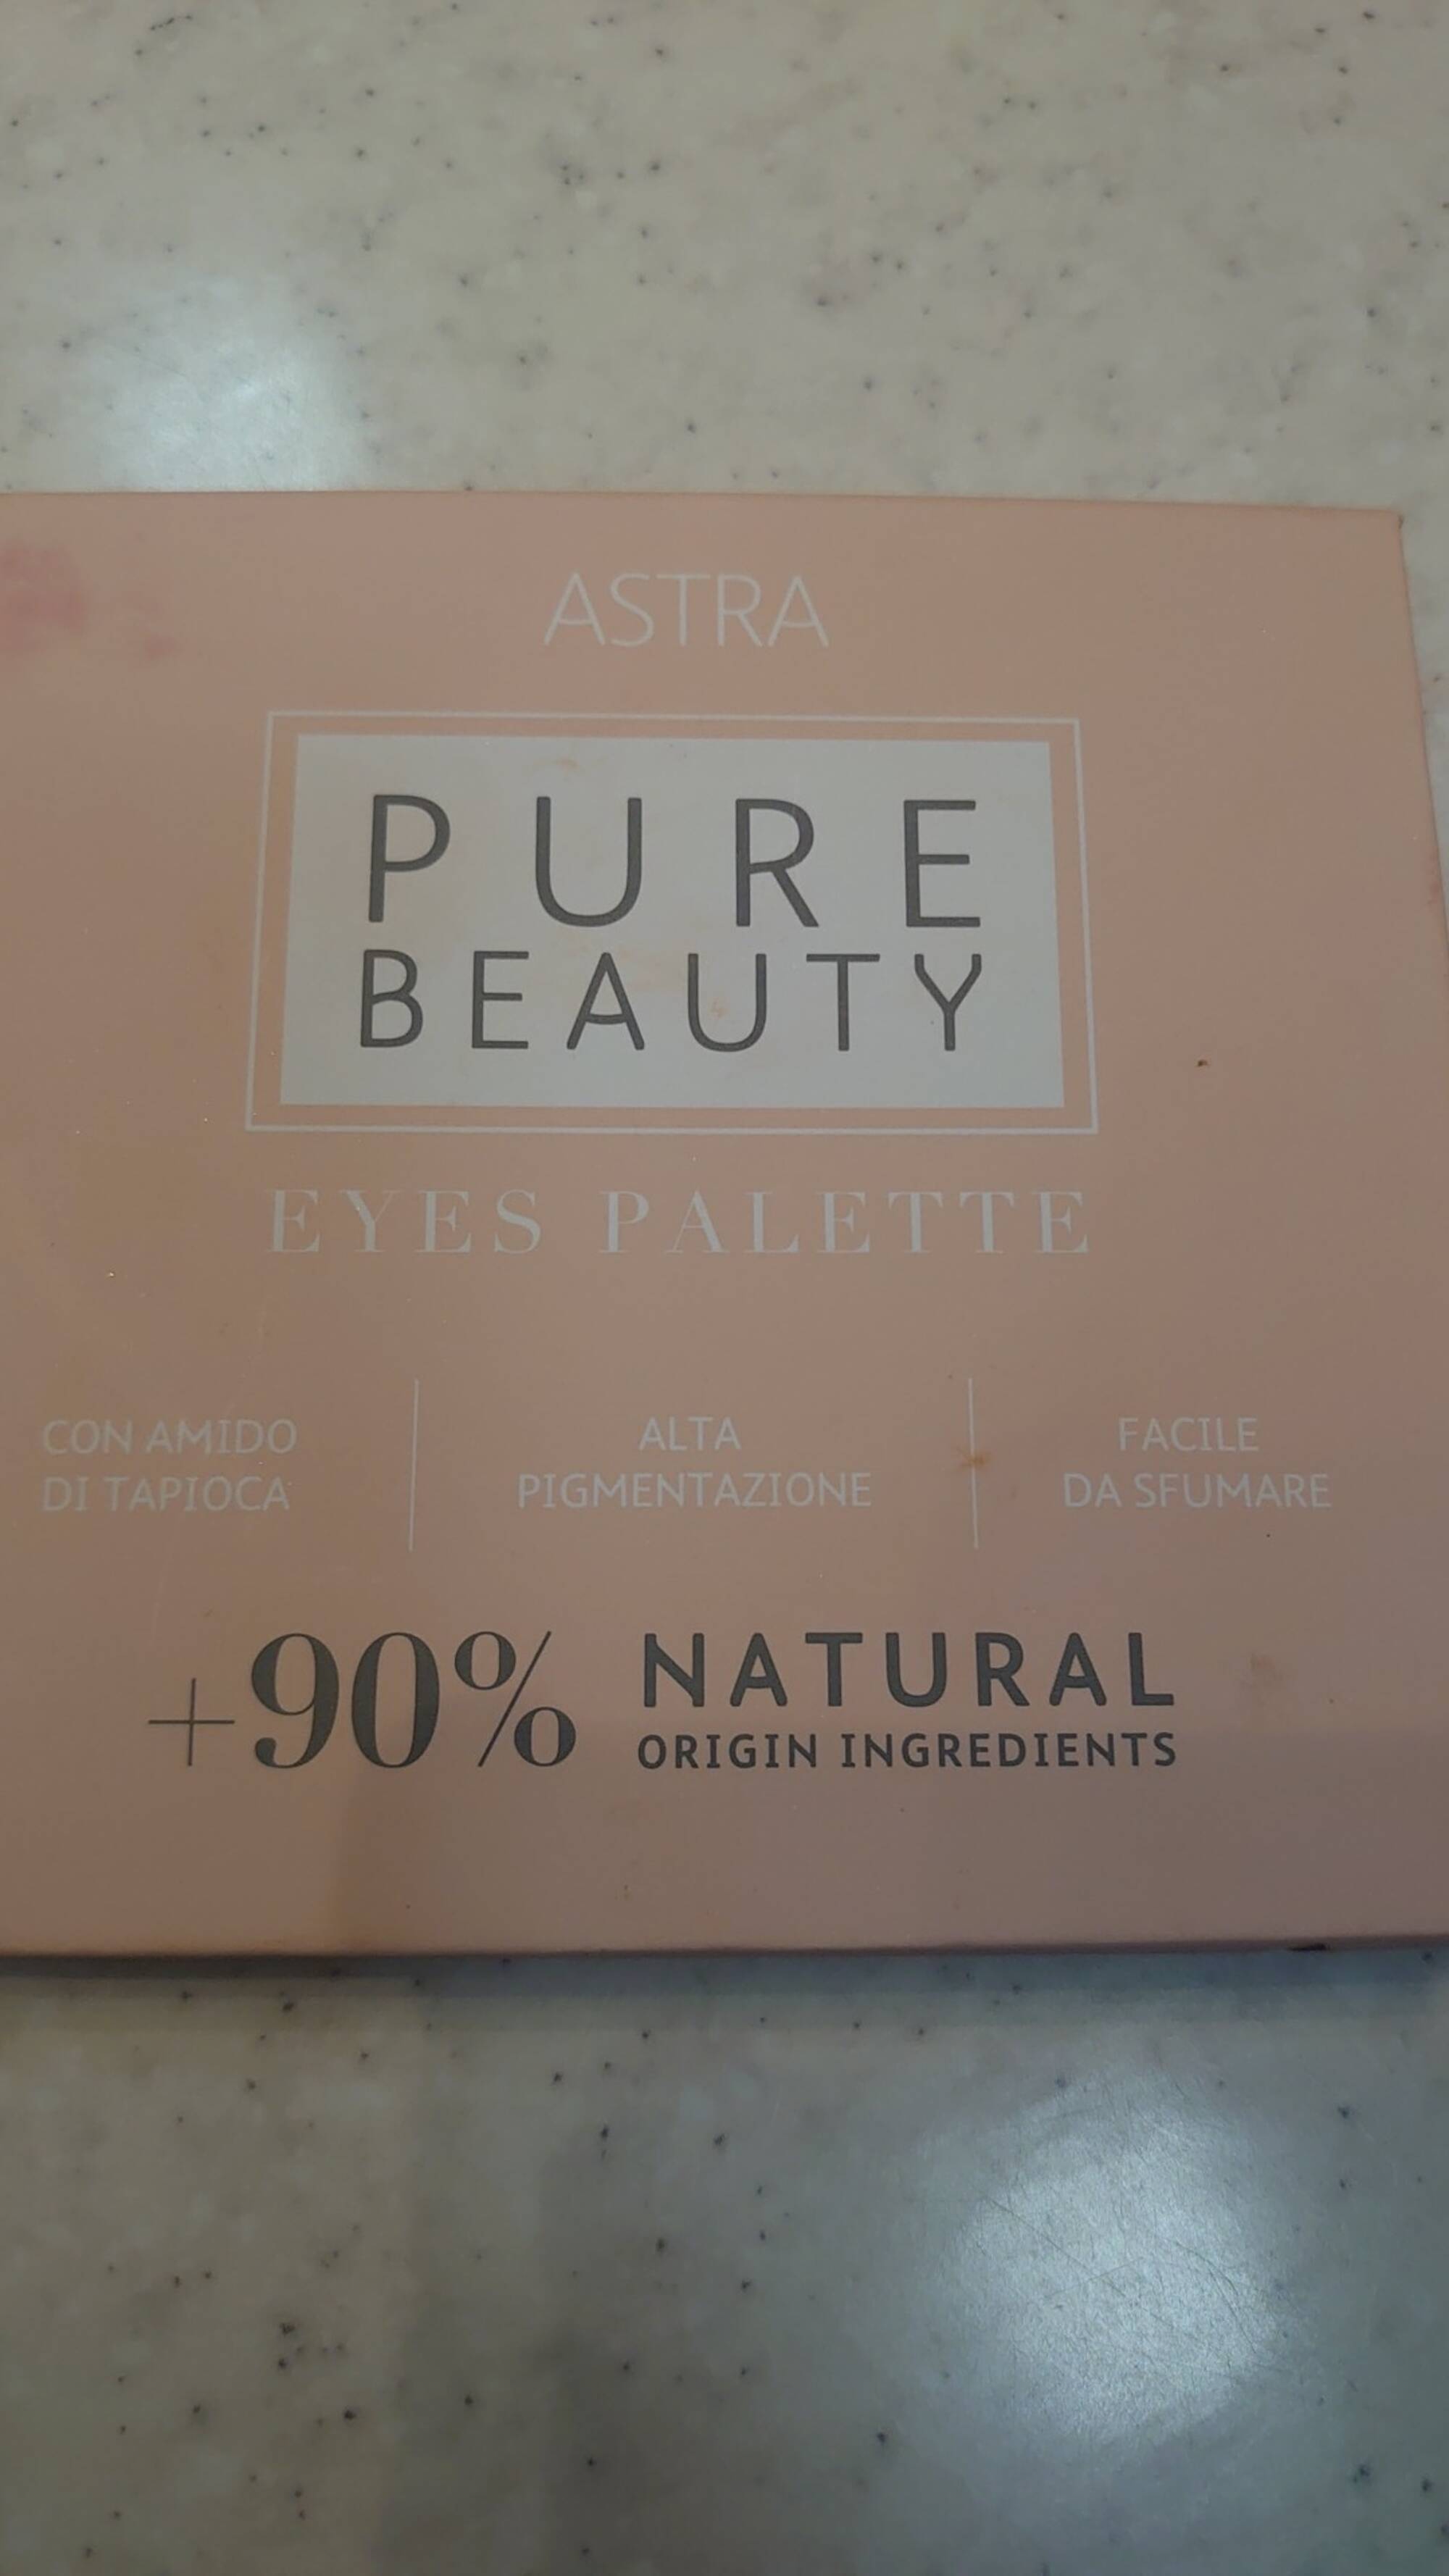 ASTRA - Pure Beauty - Eyes palette